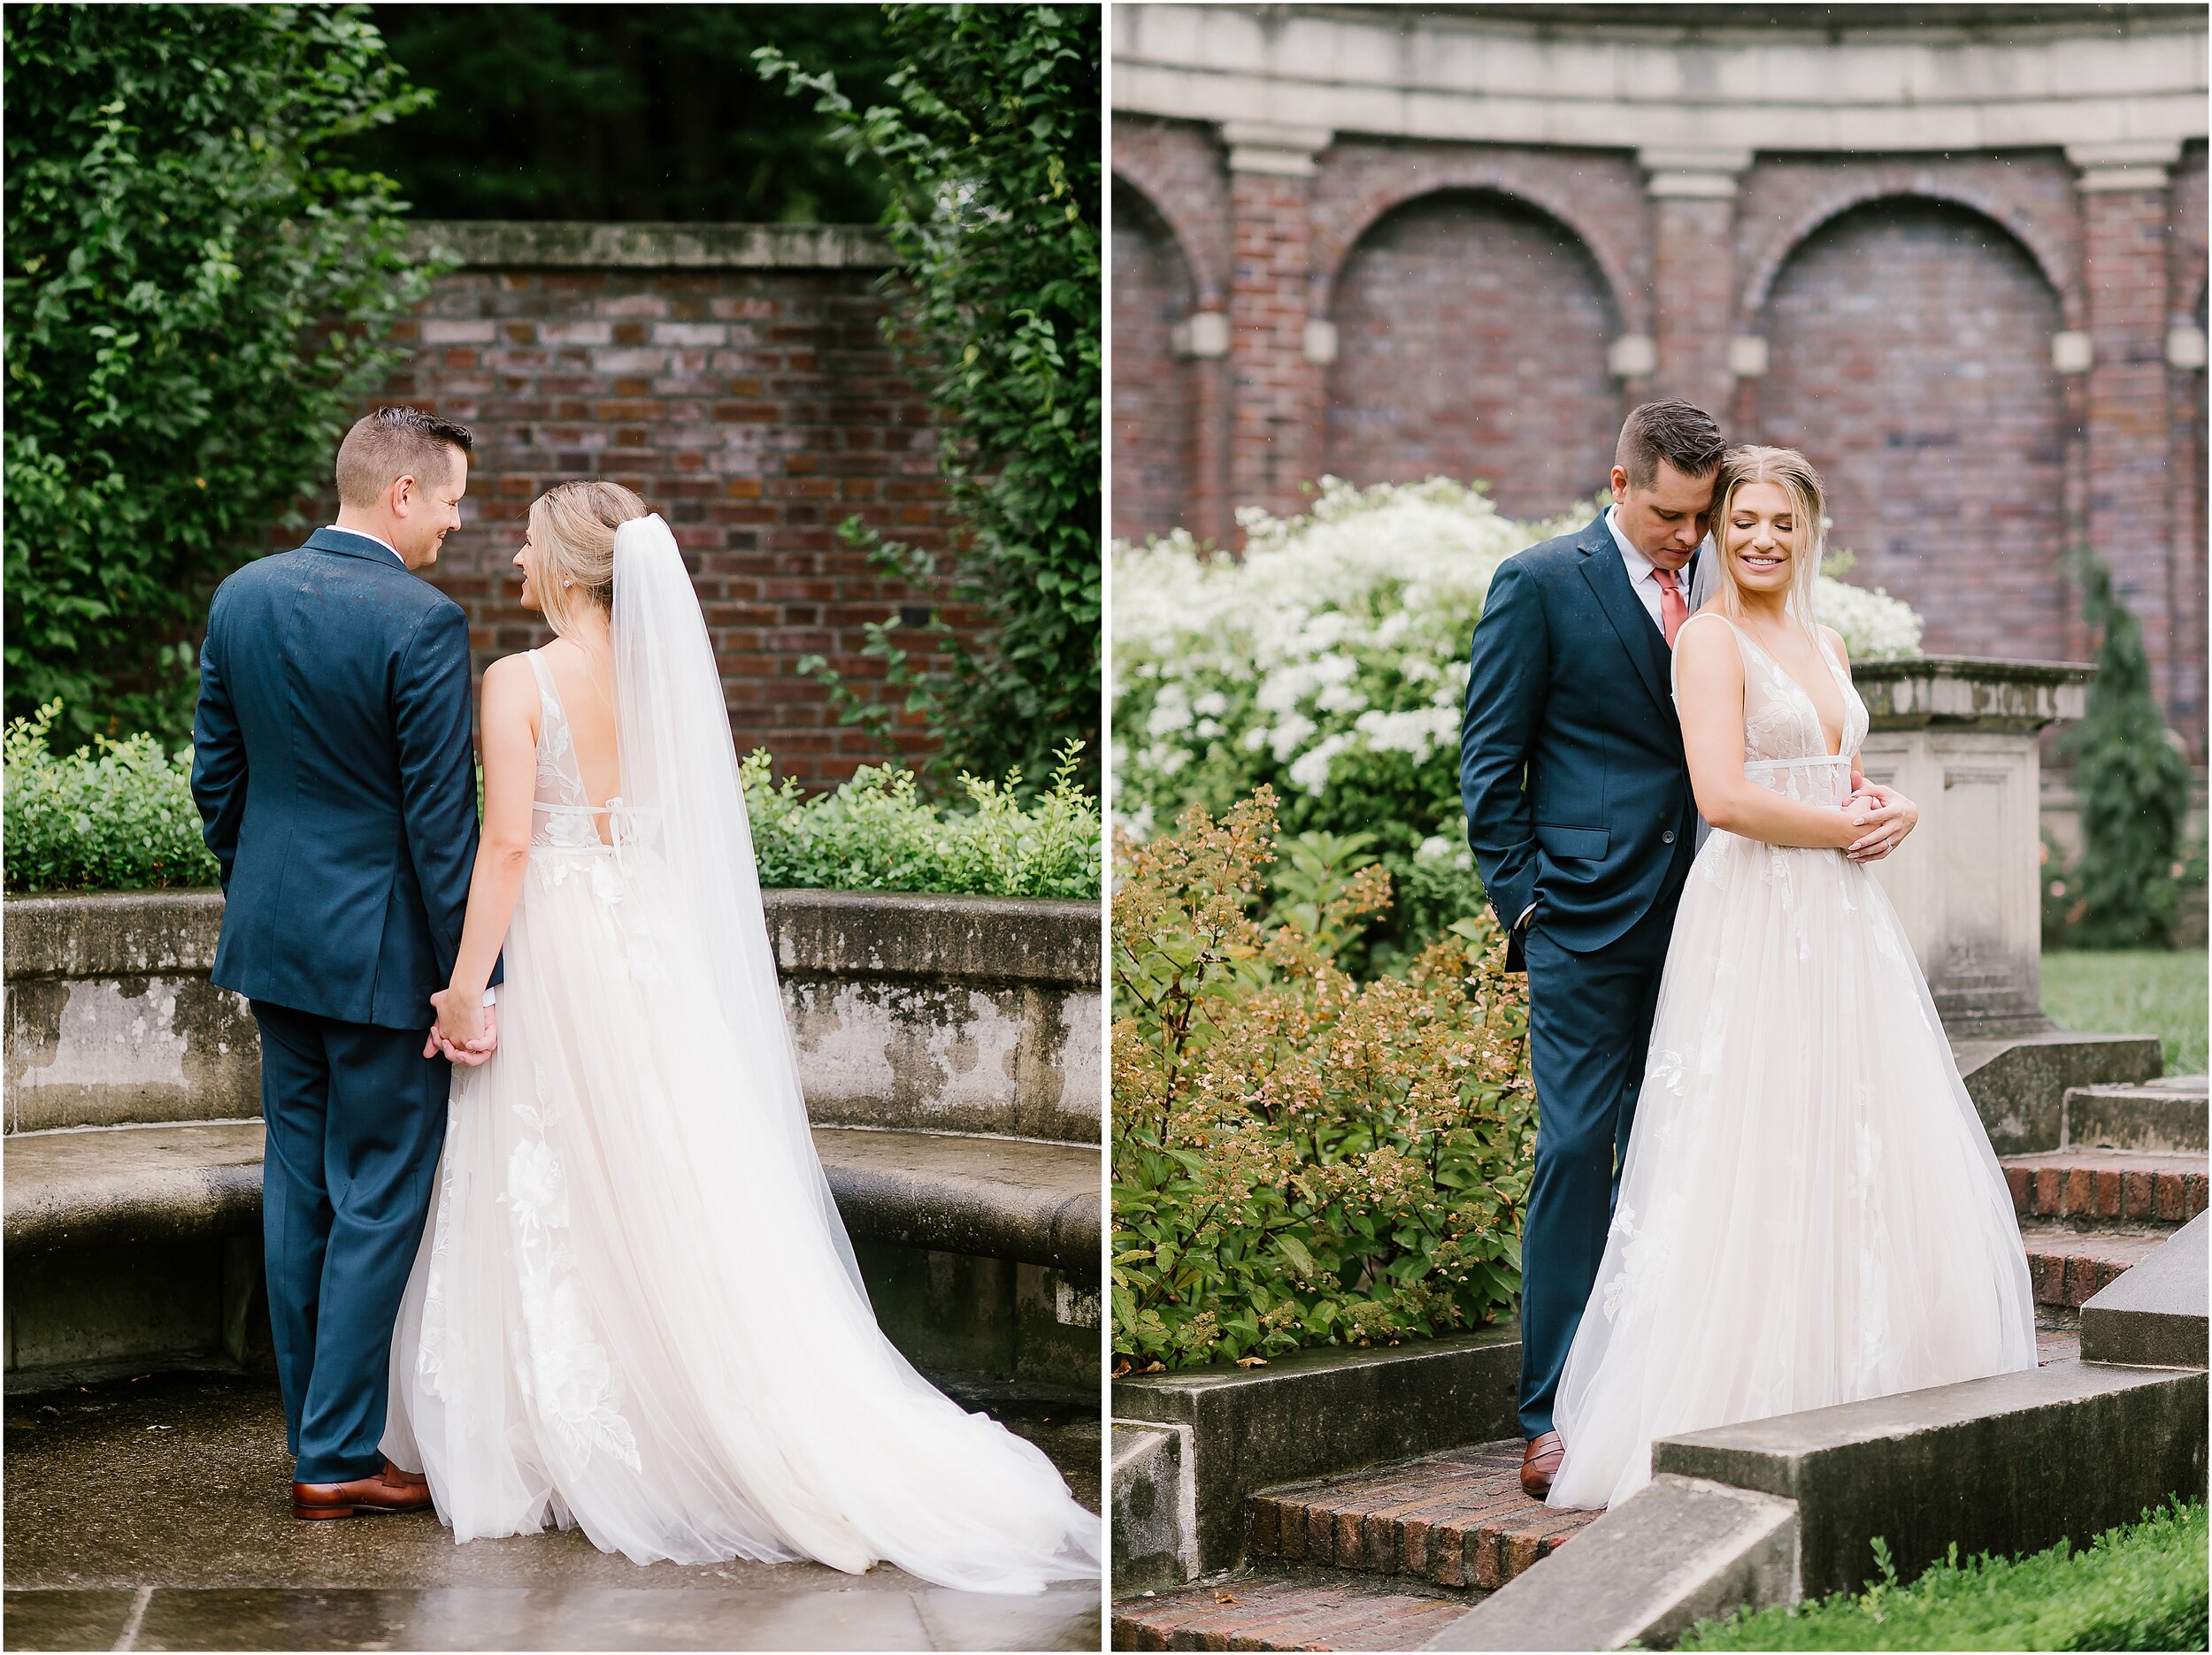 Rebecca Shehorn Photography Colleen and Kyle Inn at Irwin Gardens Wedding-730_The Commons Columbus Inn at Irwin Garden Indianapolis Wedding Photographer.jpg